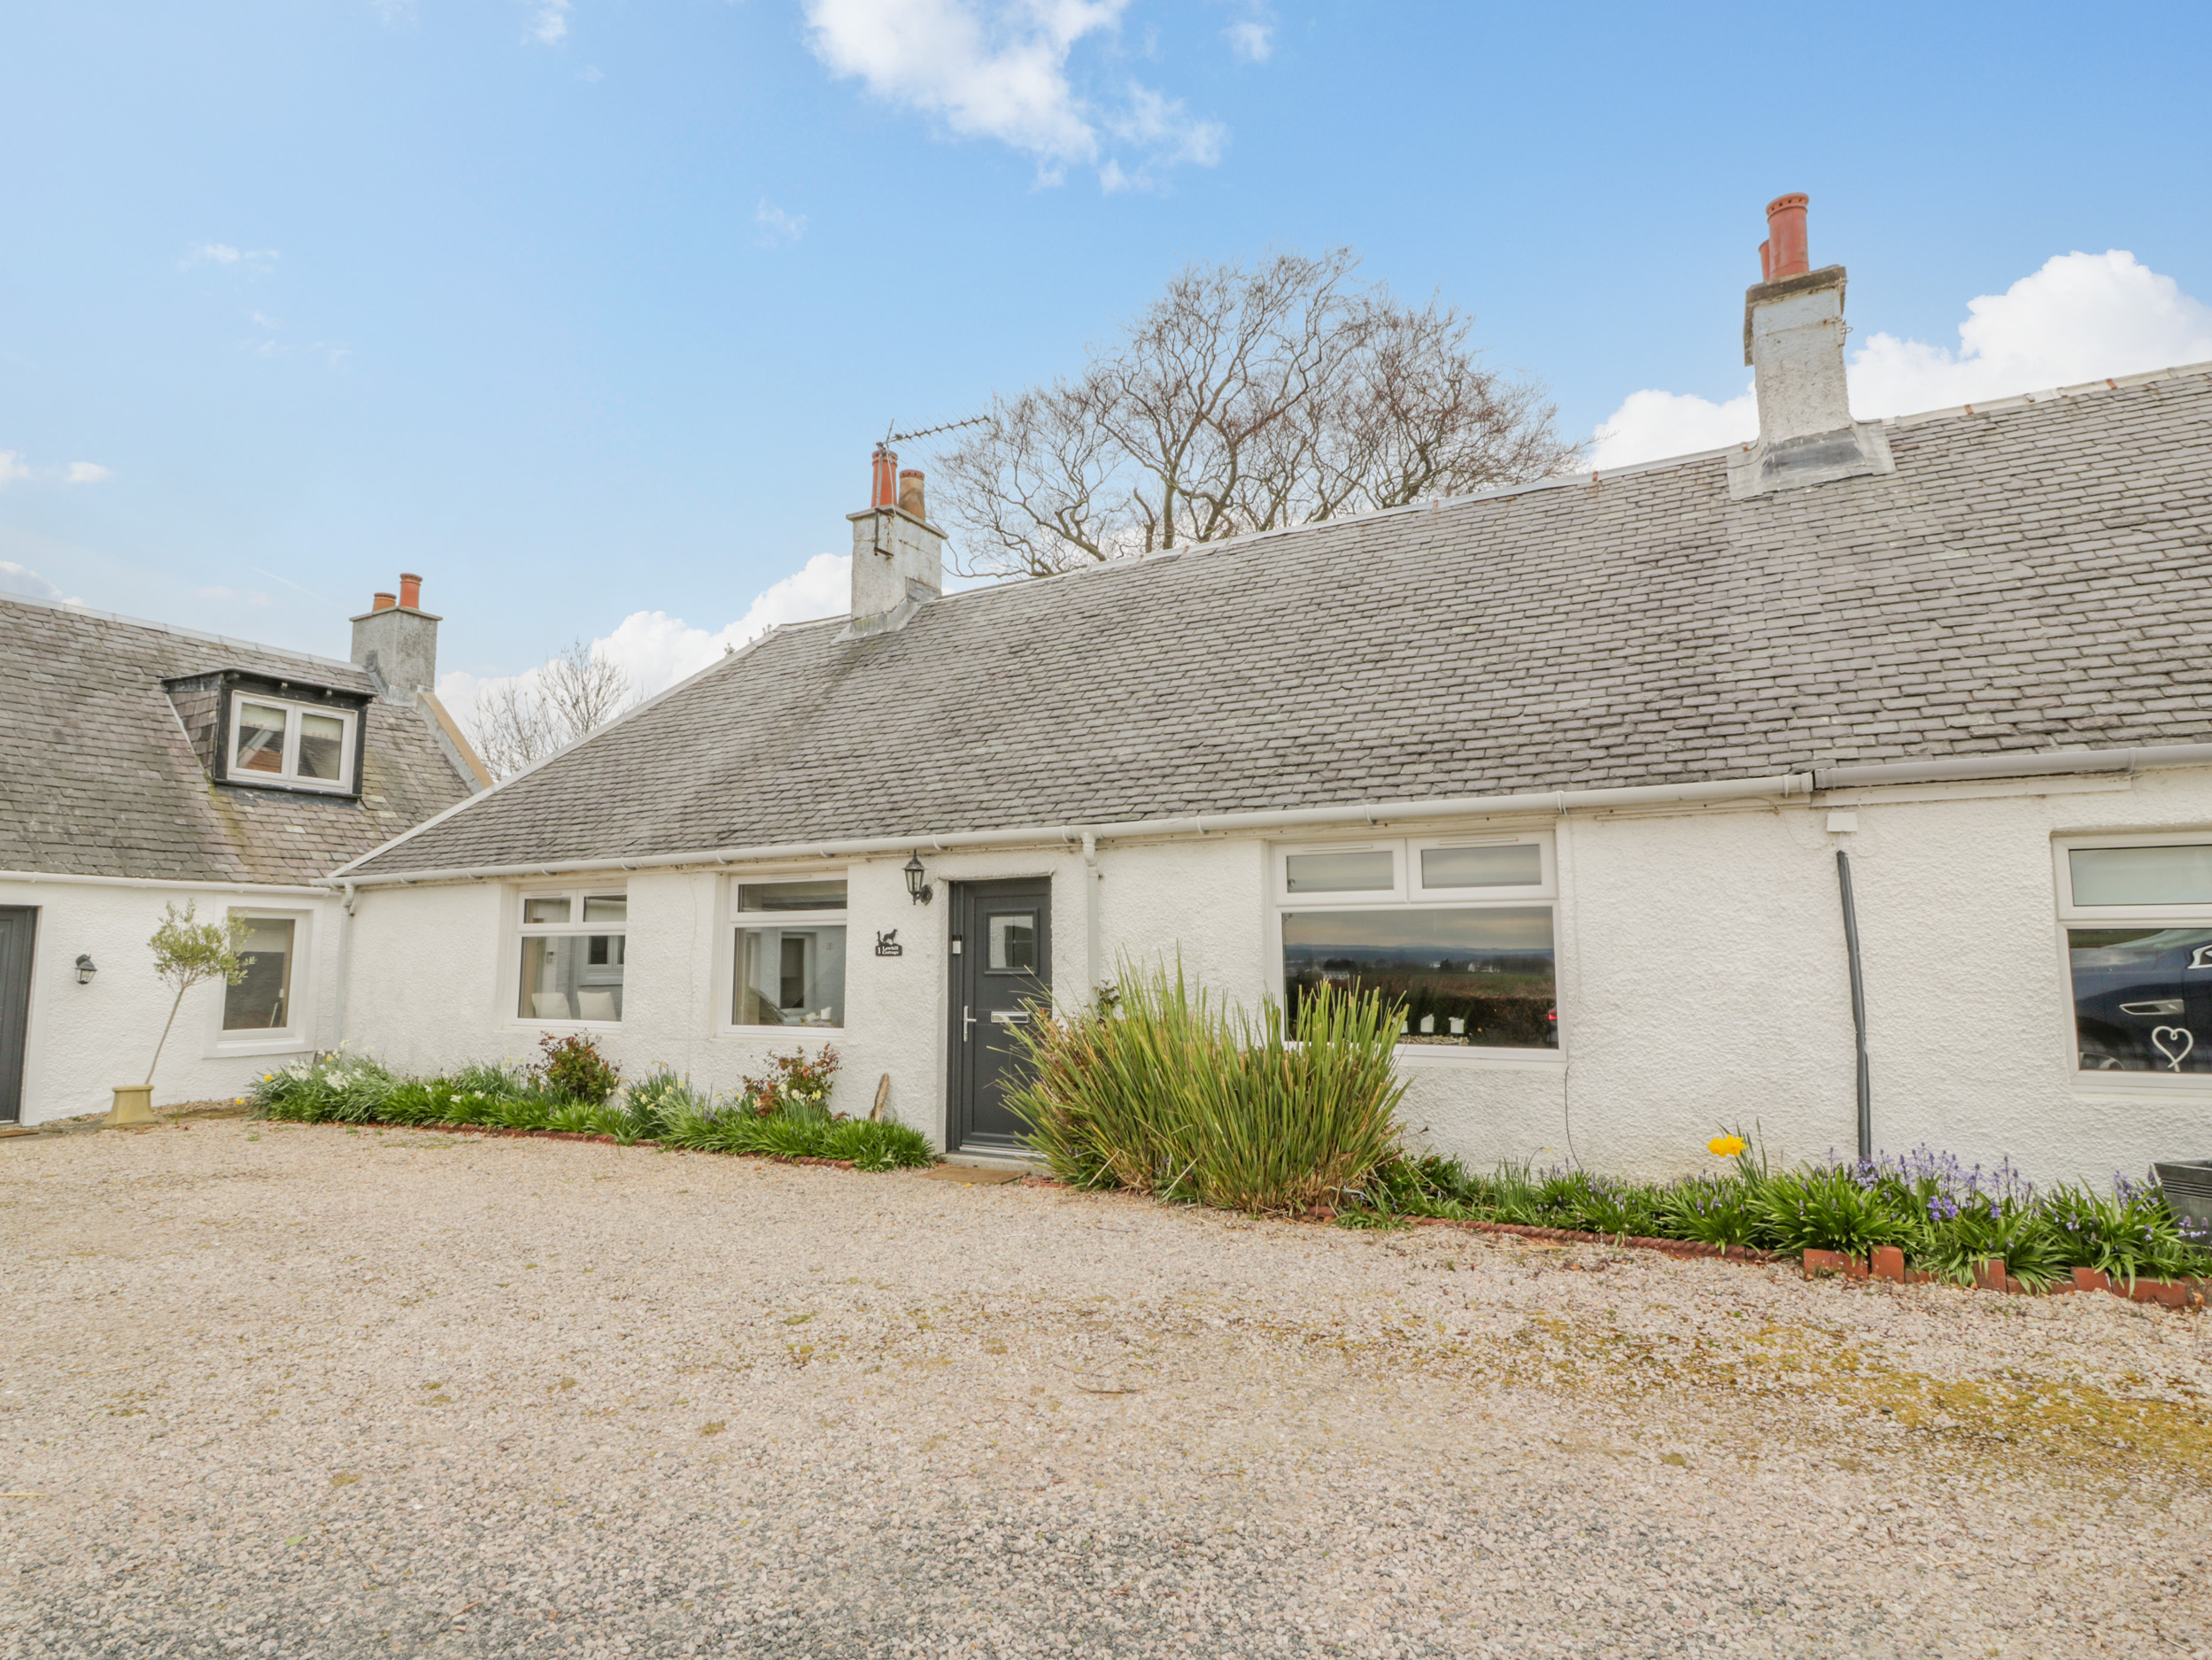 Lawhill Cottage, Troon